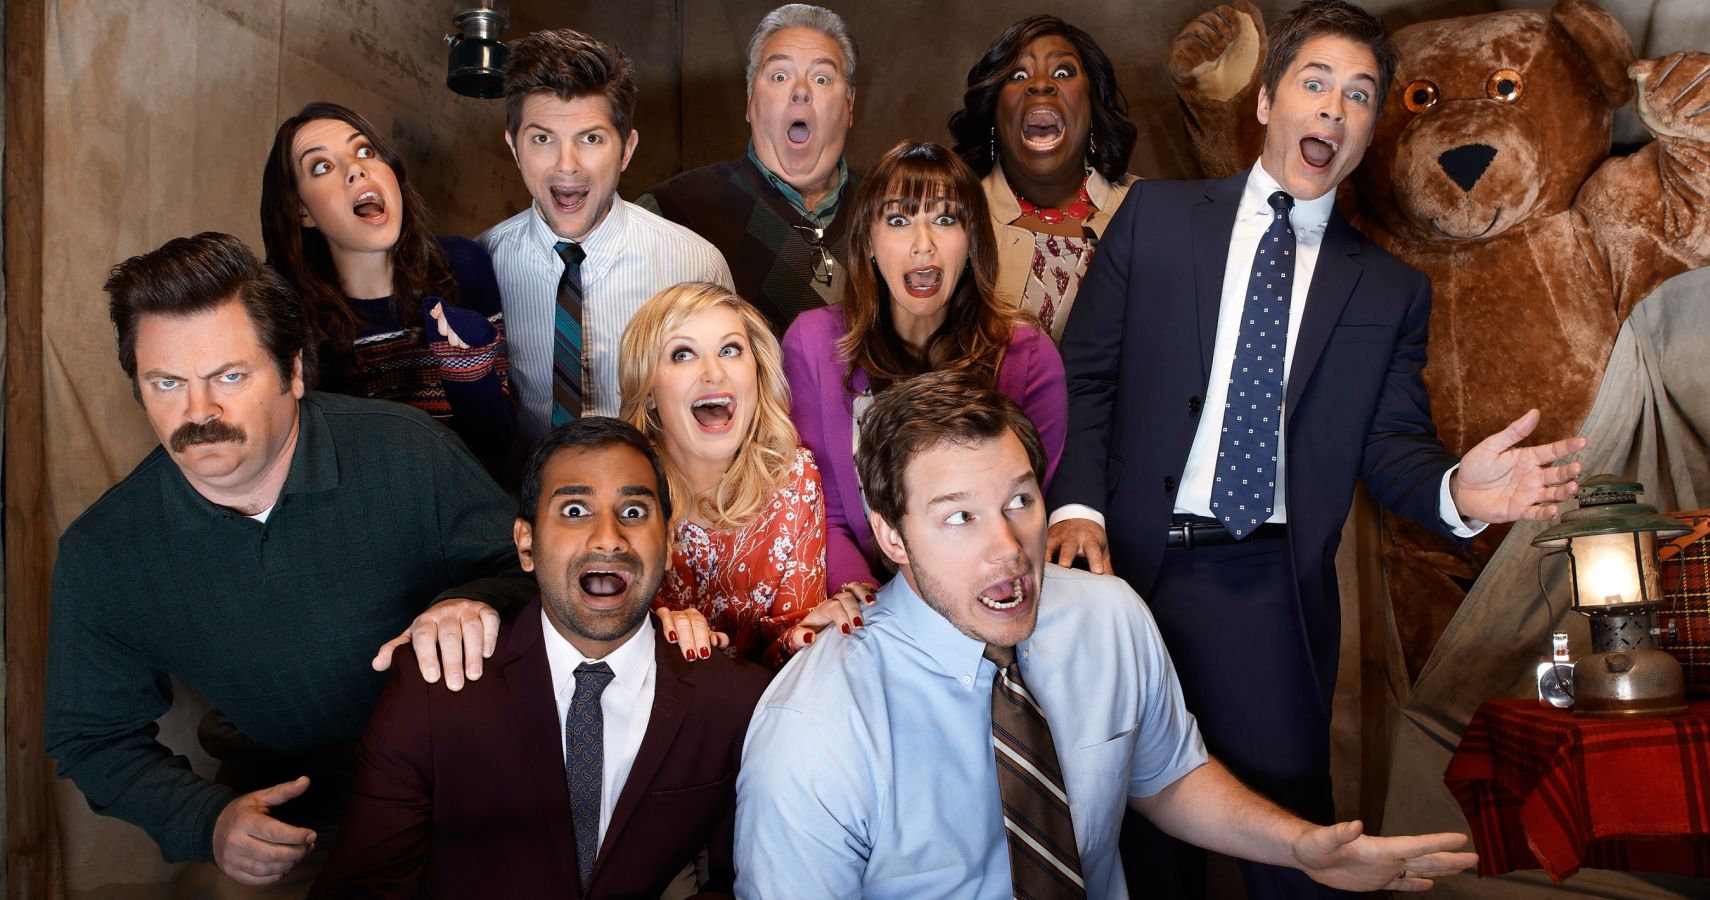 The Parks and Recreation cast looking freaked out.